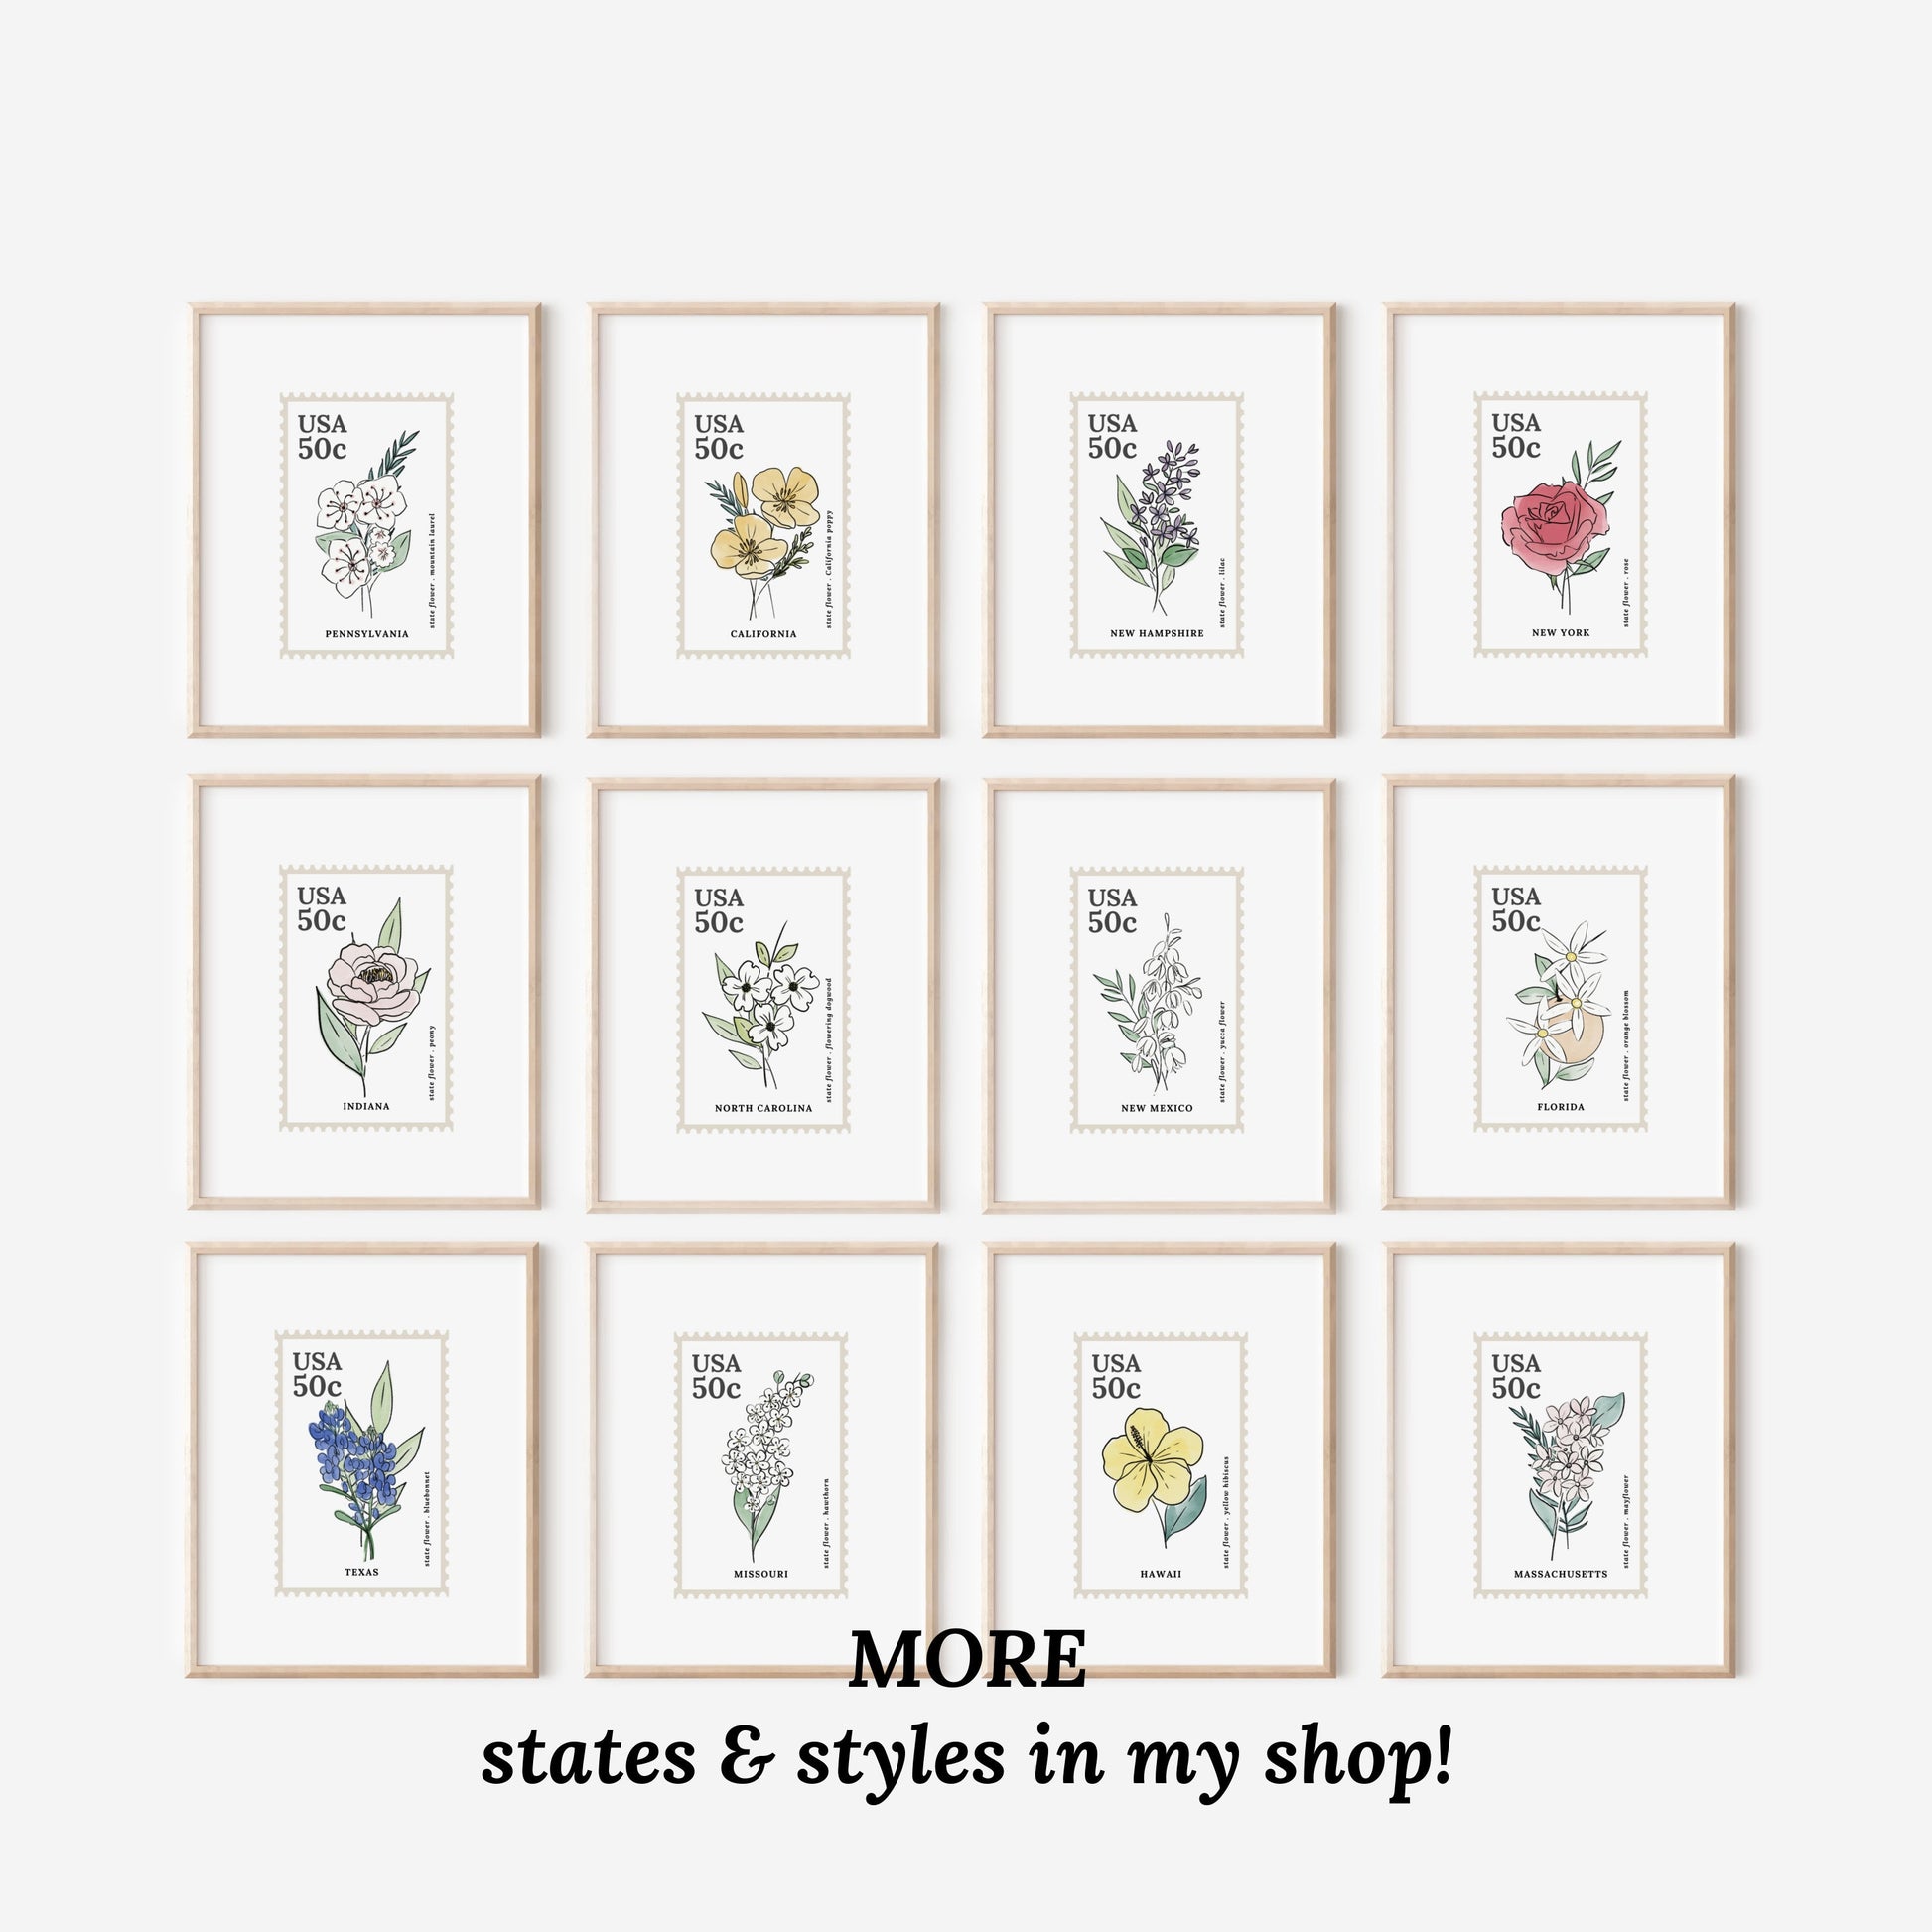 Colorado US State Flower Stamp | Rocky Mountain Columbine Watercolor Floral Art Printable